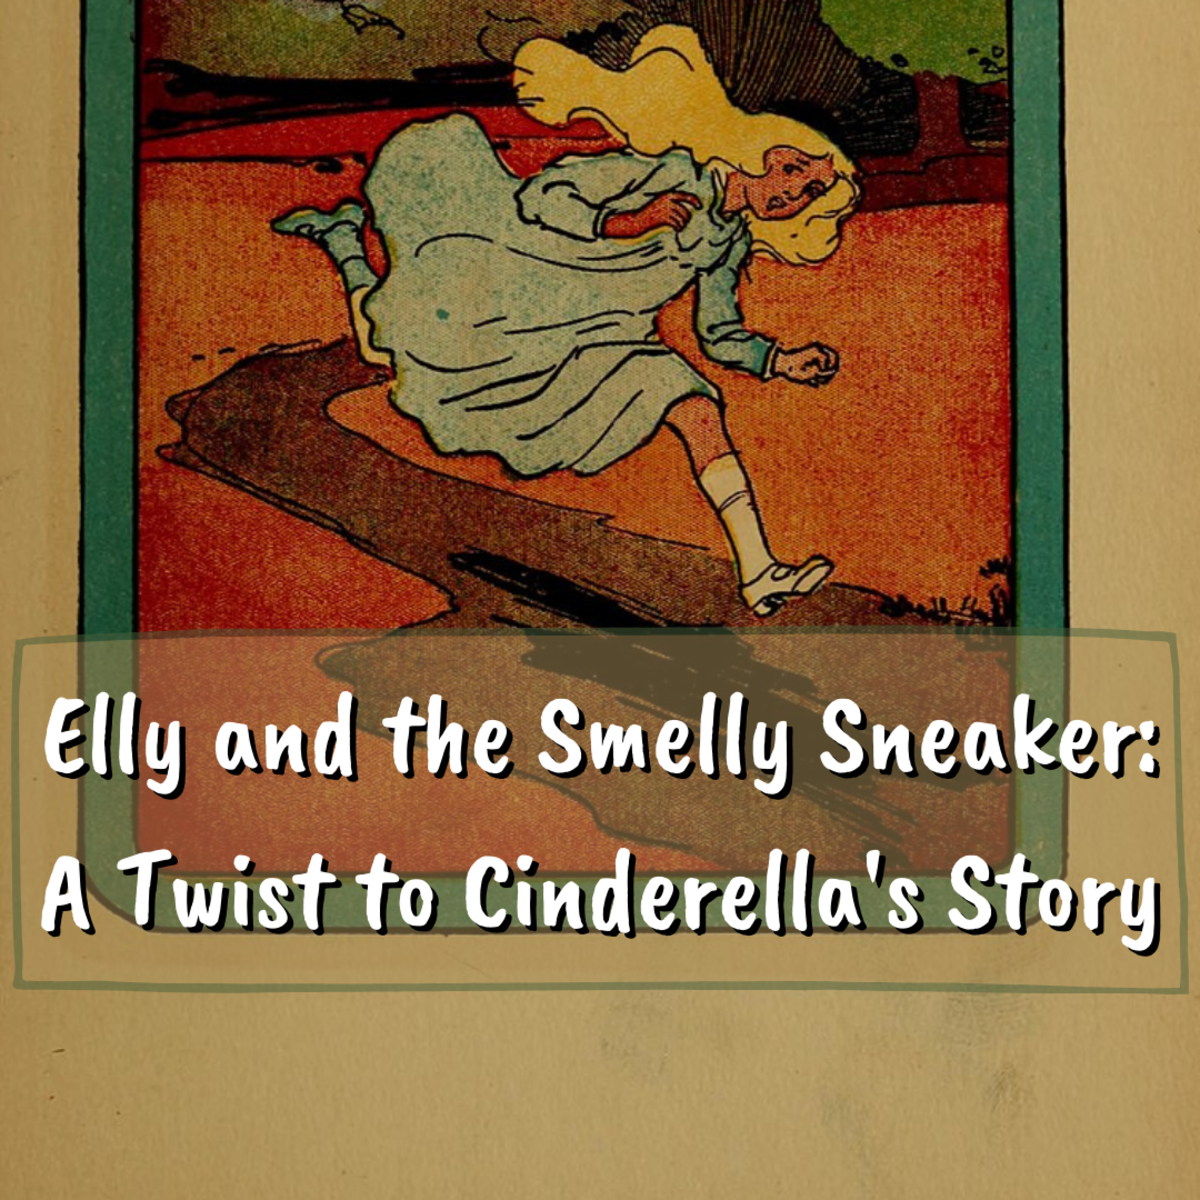 Read on to learn all about Elly and the Smelly Sneaker, a Cinderella adaptation that's great for young girls.